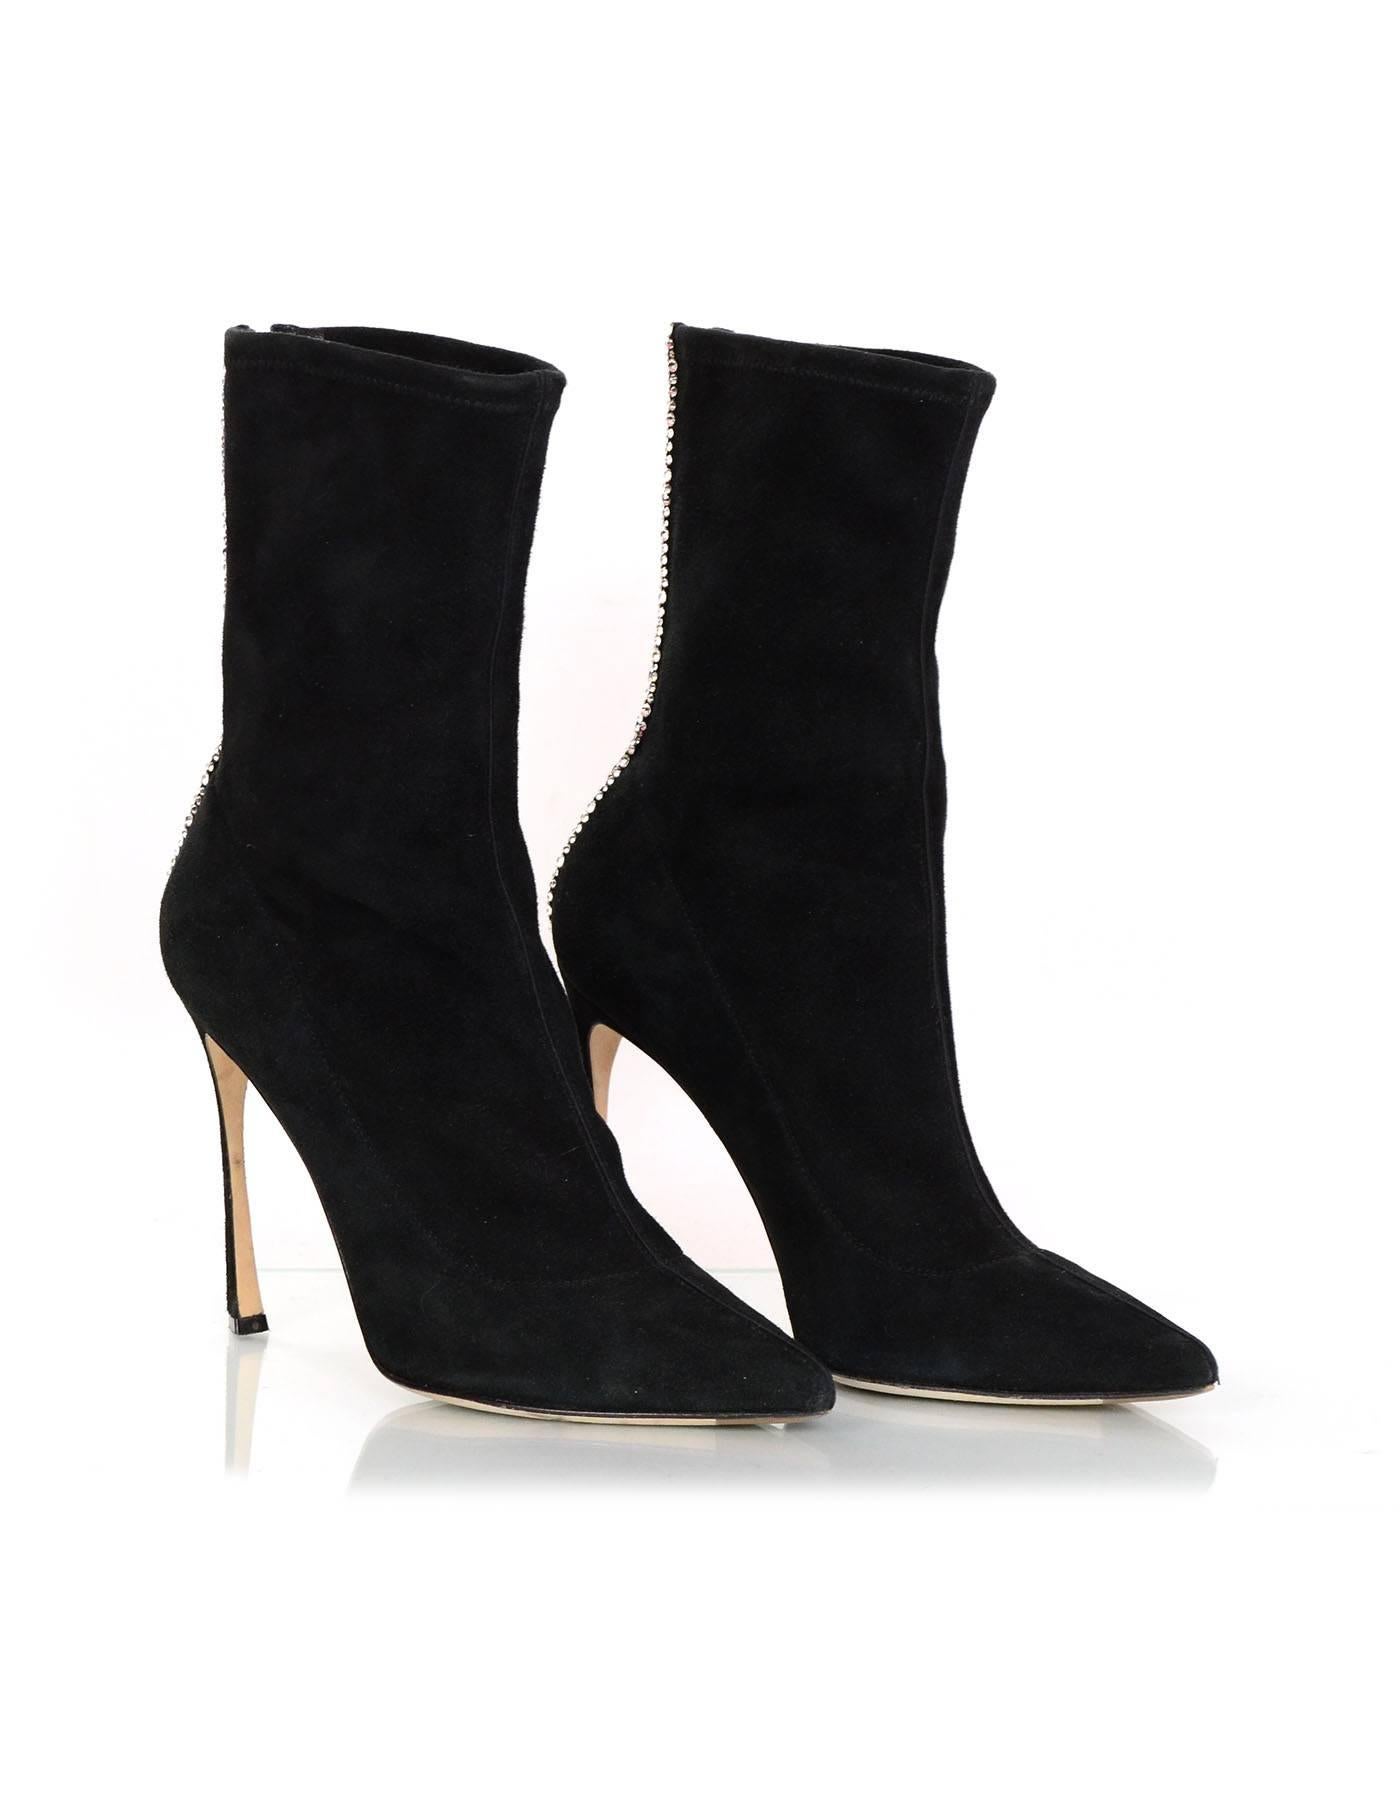 Women's Sergio Rossi Black Suede Point Toe Boots w/ Back Crystal Detail sz 38.5 rt $1460